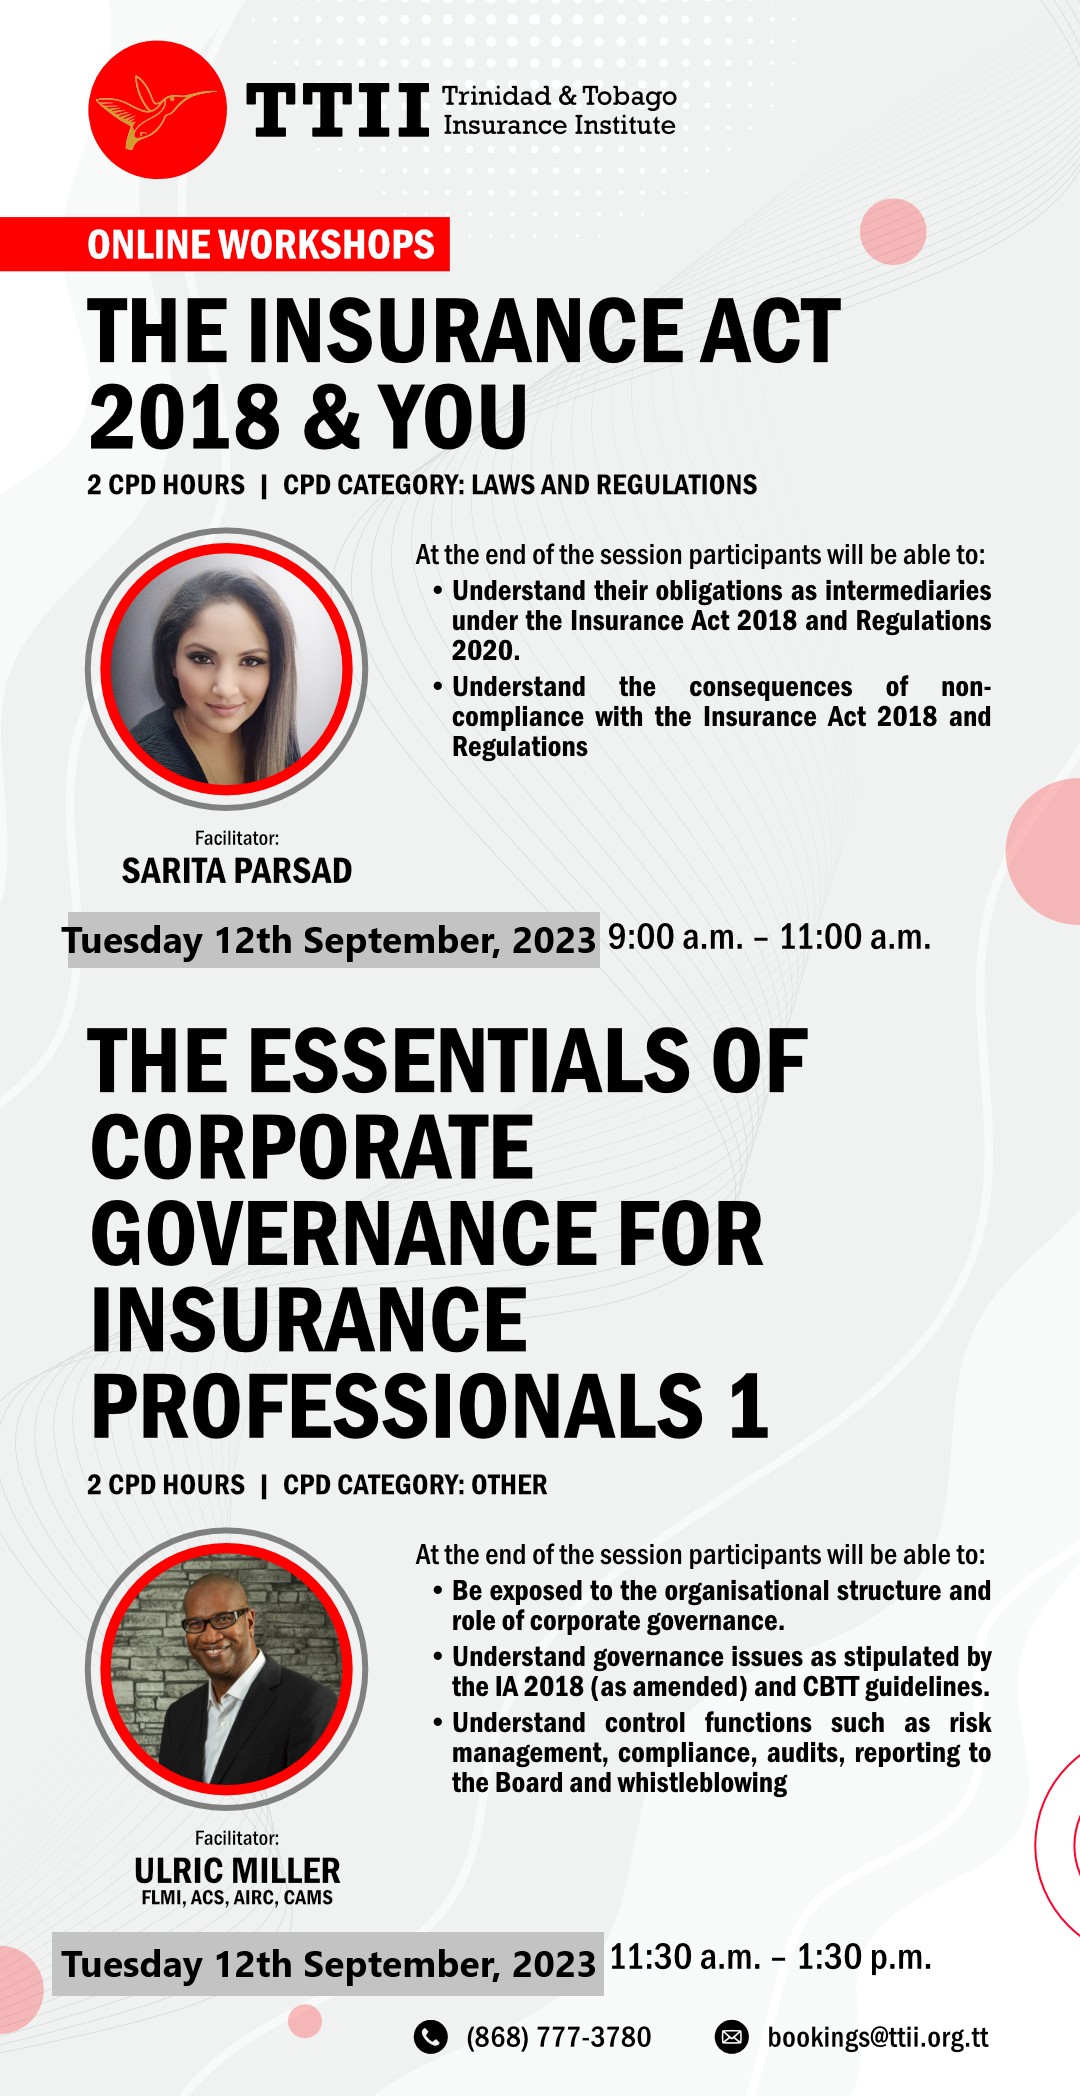 The Insurance Act 2018 & You And The Essentials of Corporate Governance 1